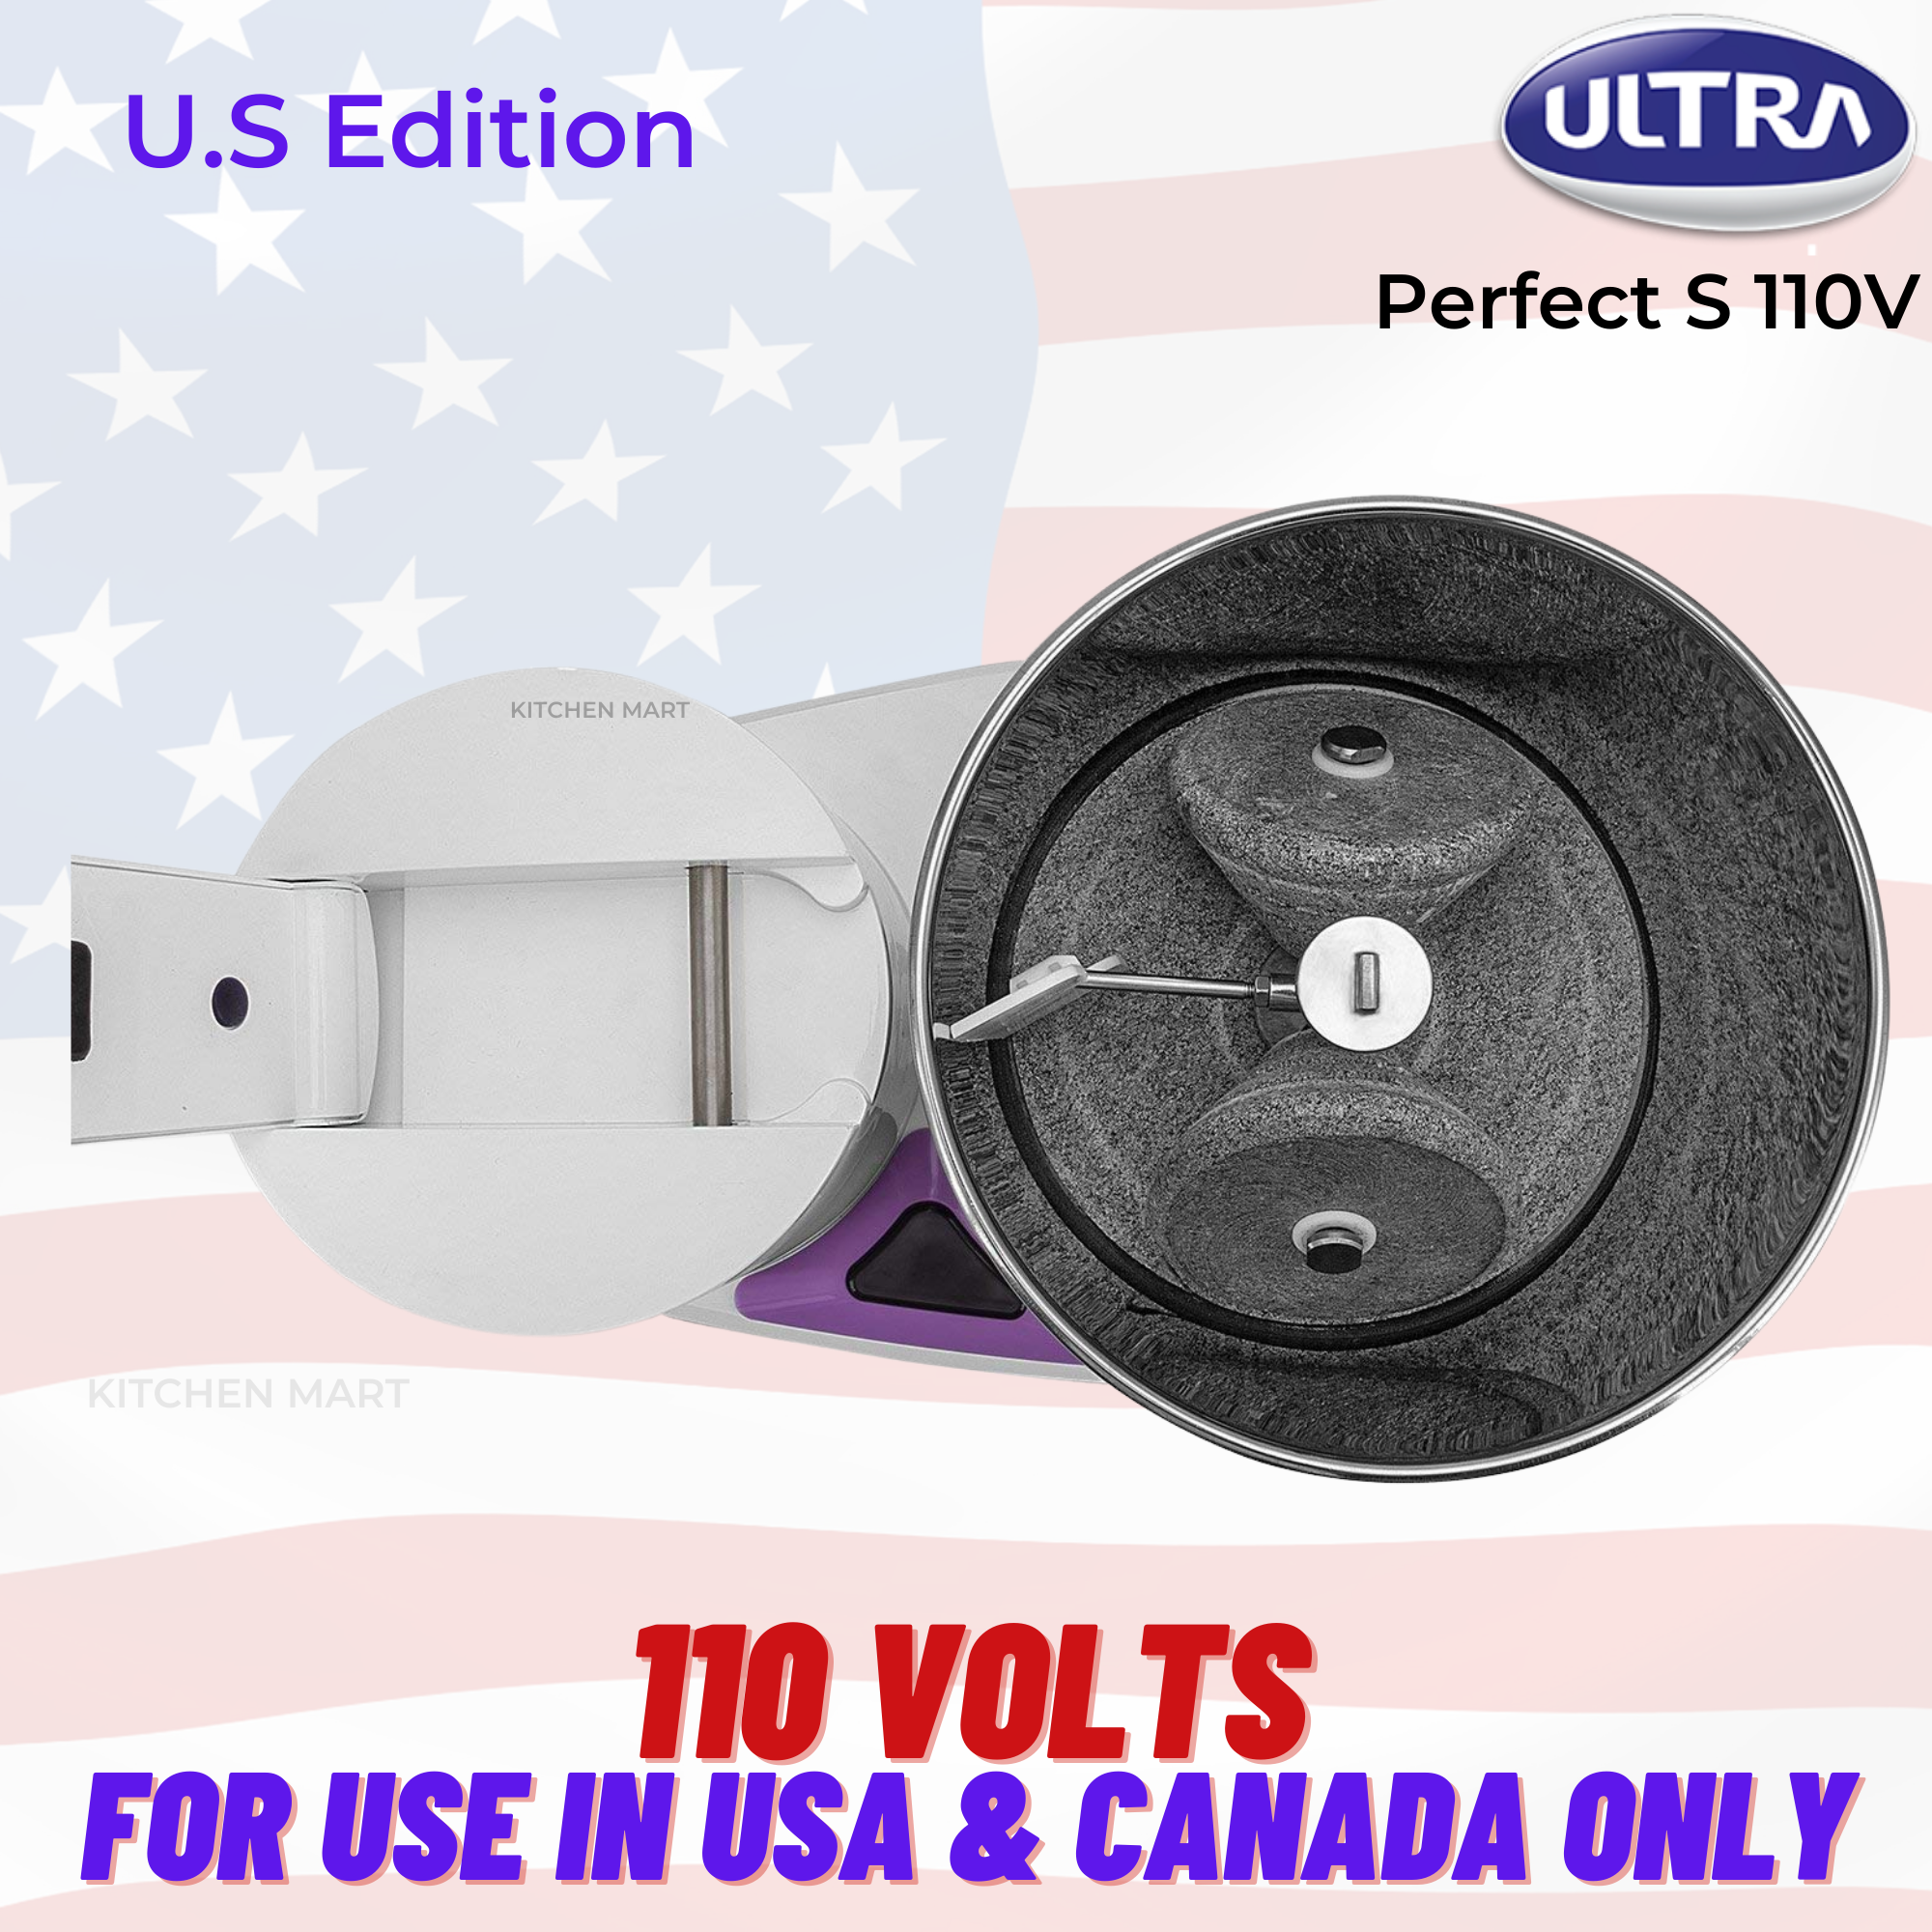 ultra wet grinder perfect s 110 volts for use in usa and canada